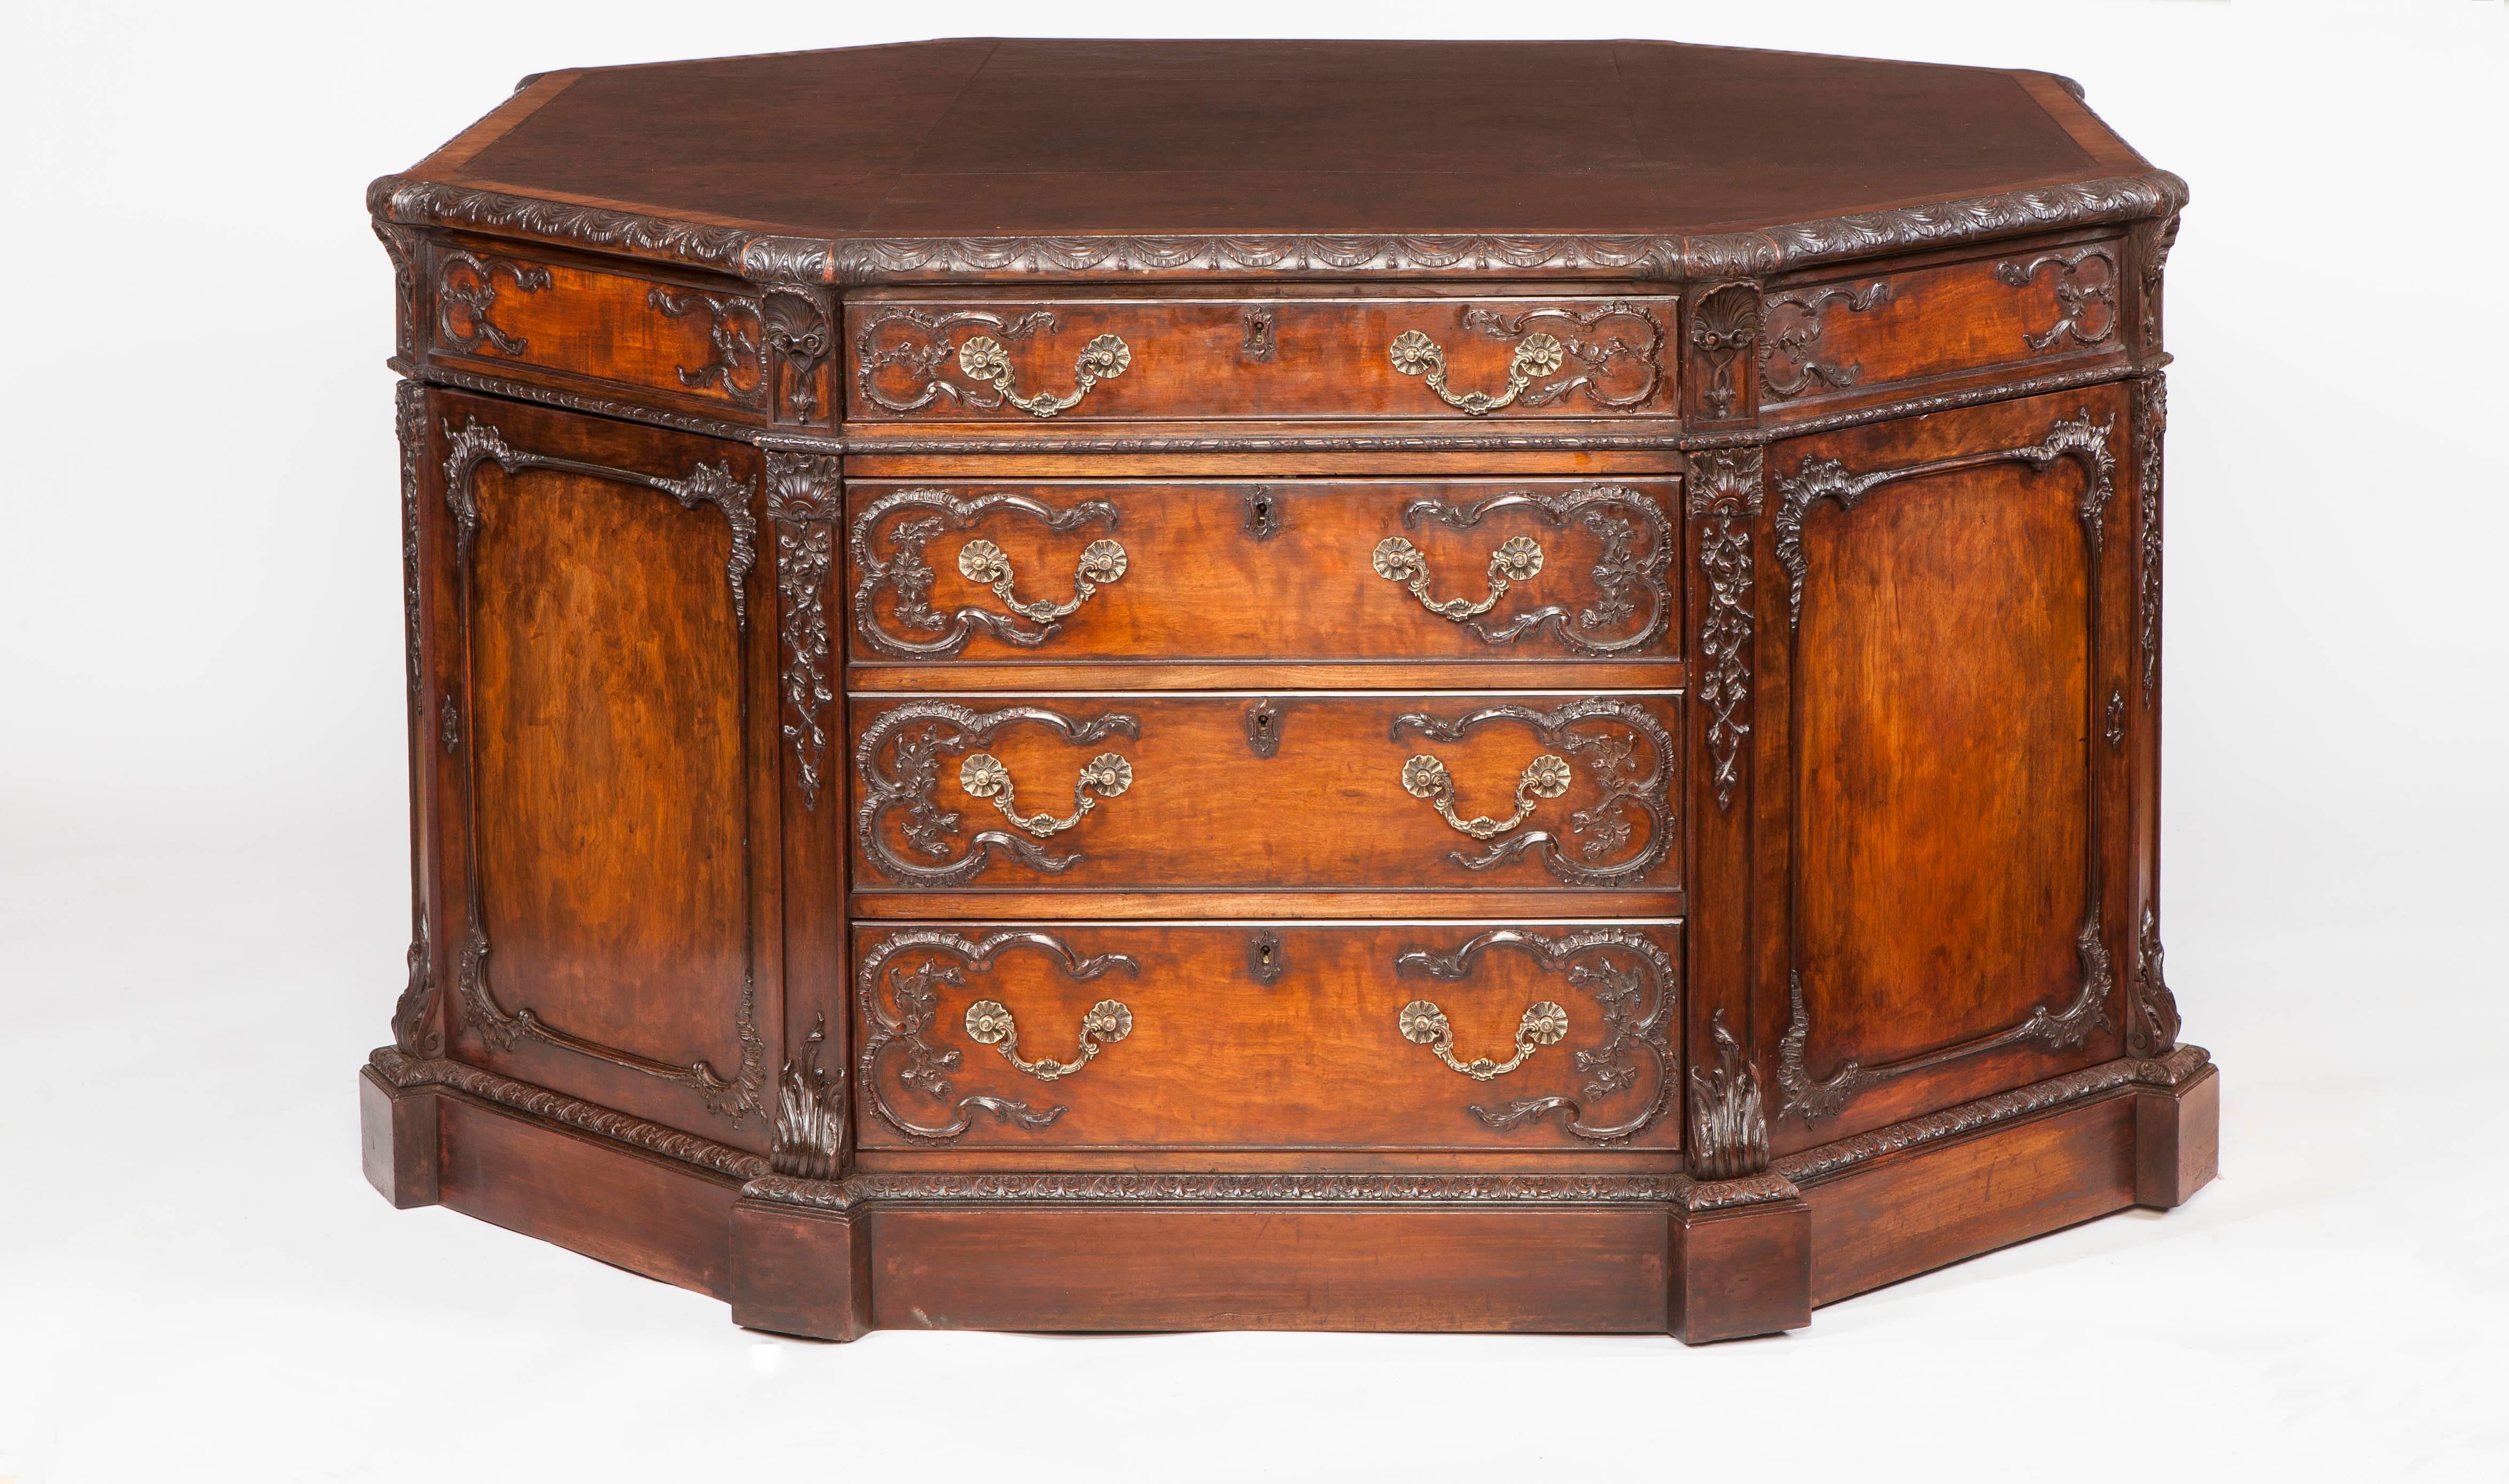 
A fine octagonal library desk stamped by H. Samuel of London

Constructed in a well figured mahogany, adorned with applique rocaille scroll work rising from foliate carved and shaped plinth inset feet, the pedestals separated by reeded stiles